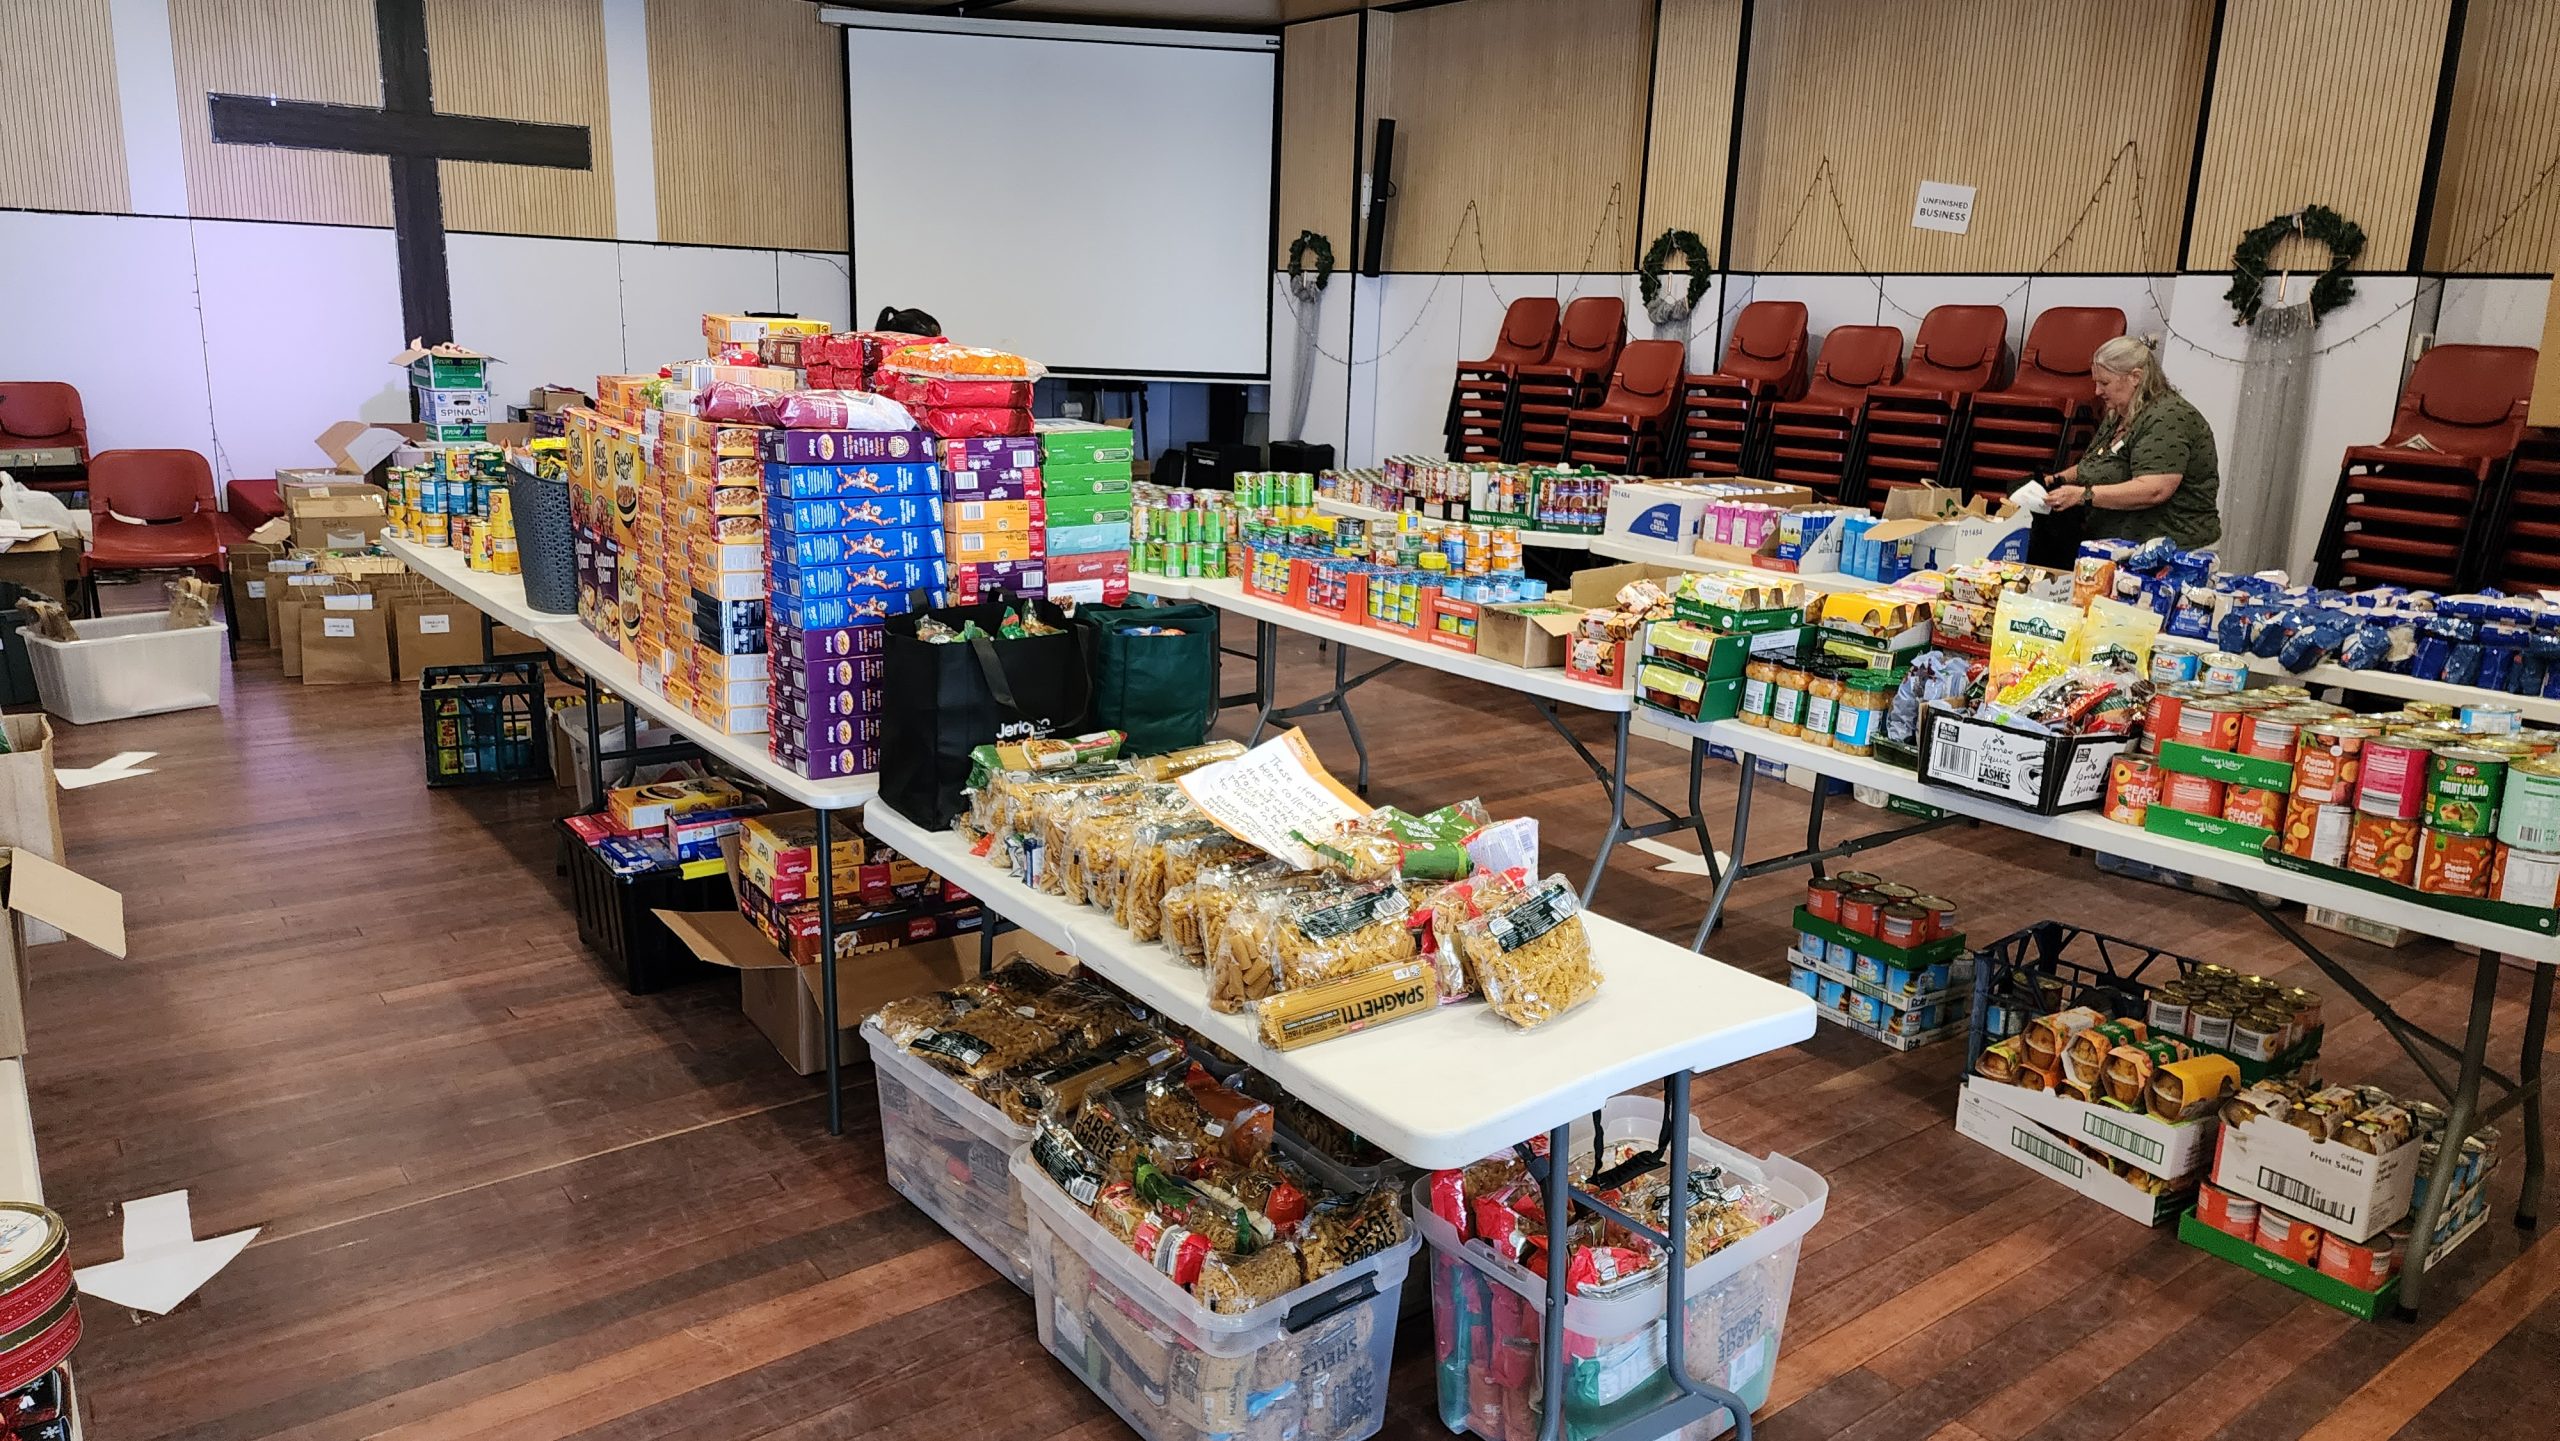 The food items come from all over the place - collected by churches over many weeks, or purchased by our team with the funds donated - laid out and ready to be packed.